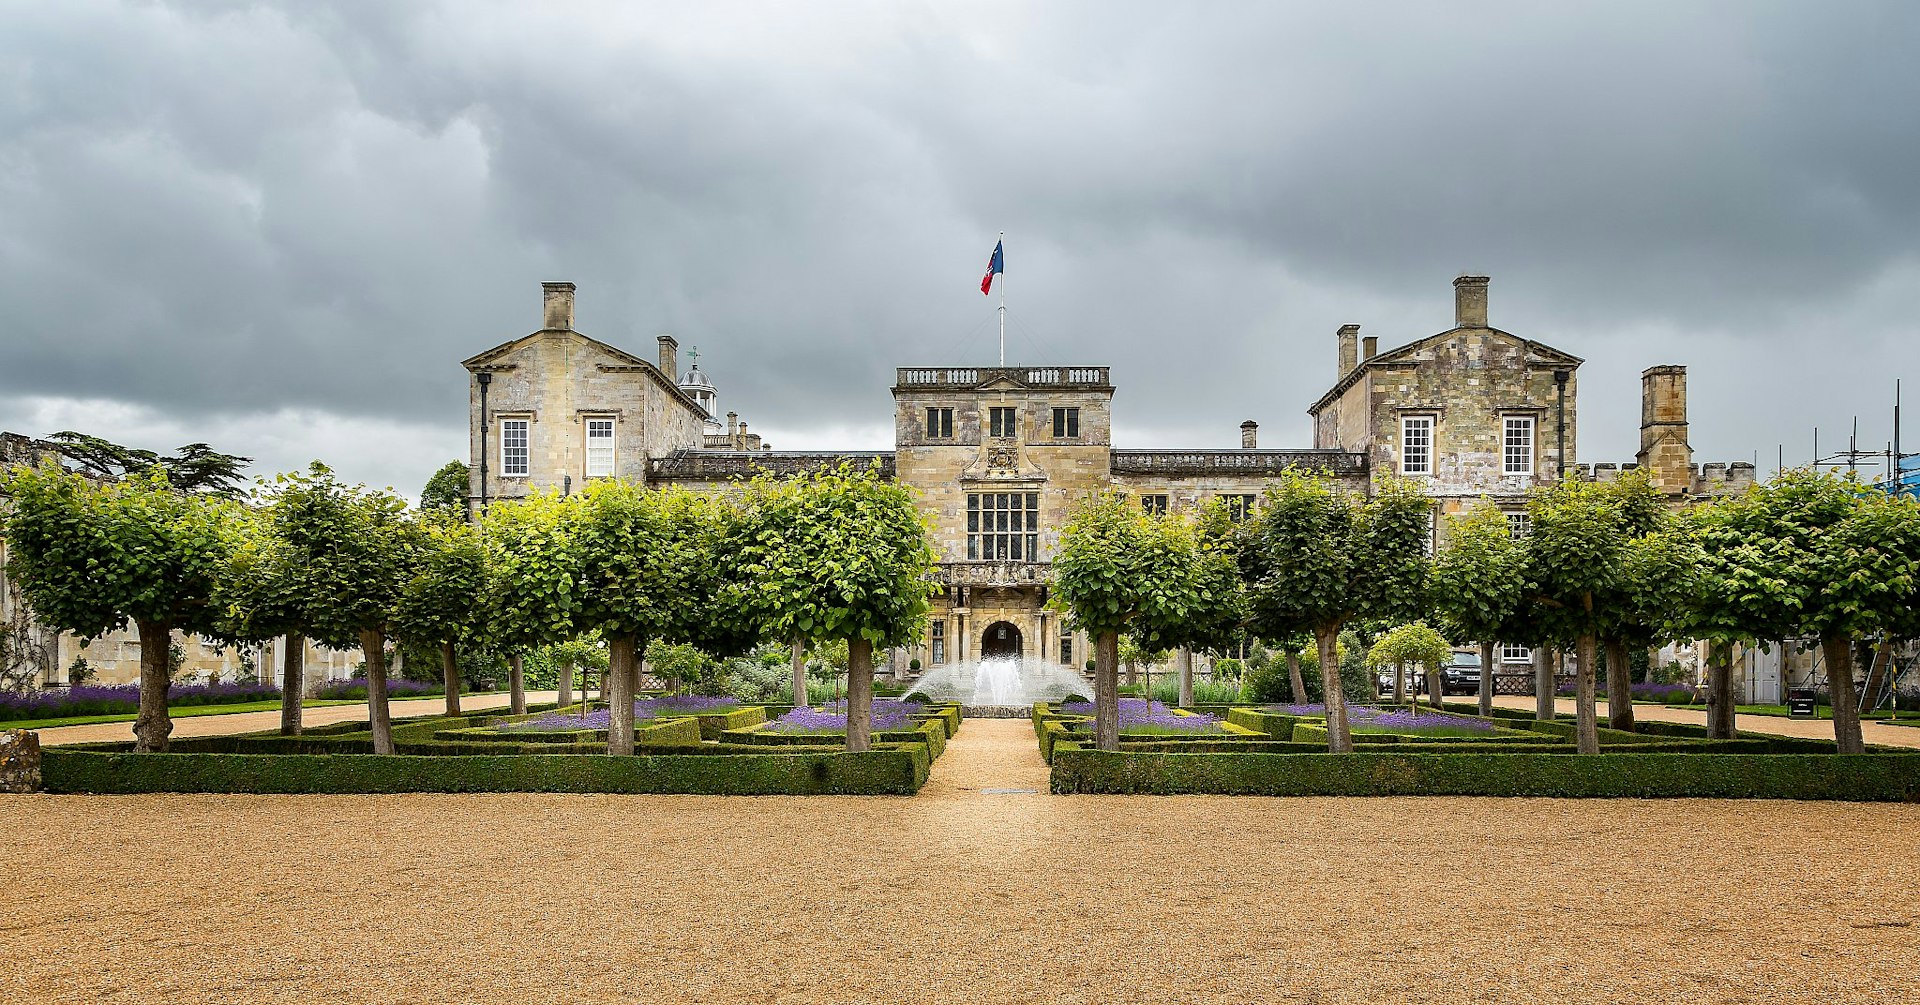 Wilton House, a stone neoclassical mansion, with a garden full of frees in front of it. 